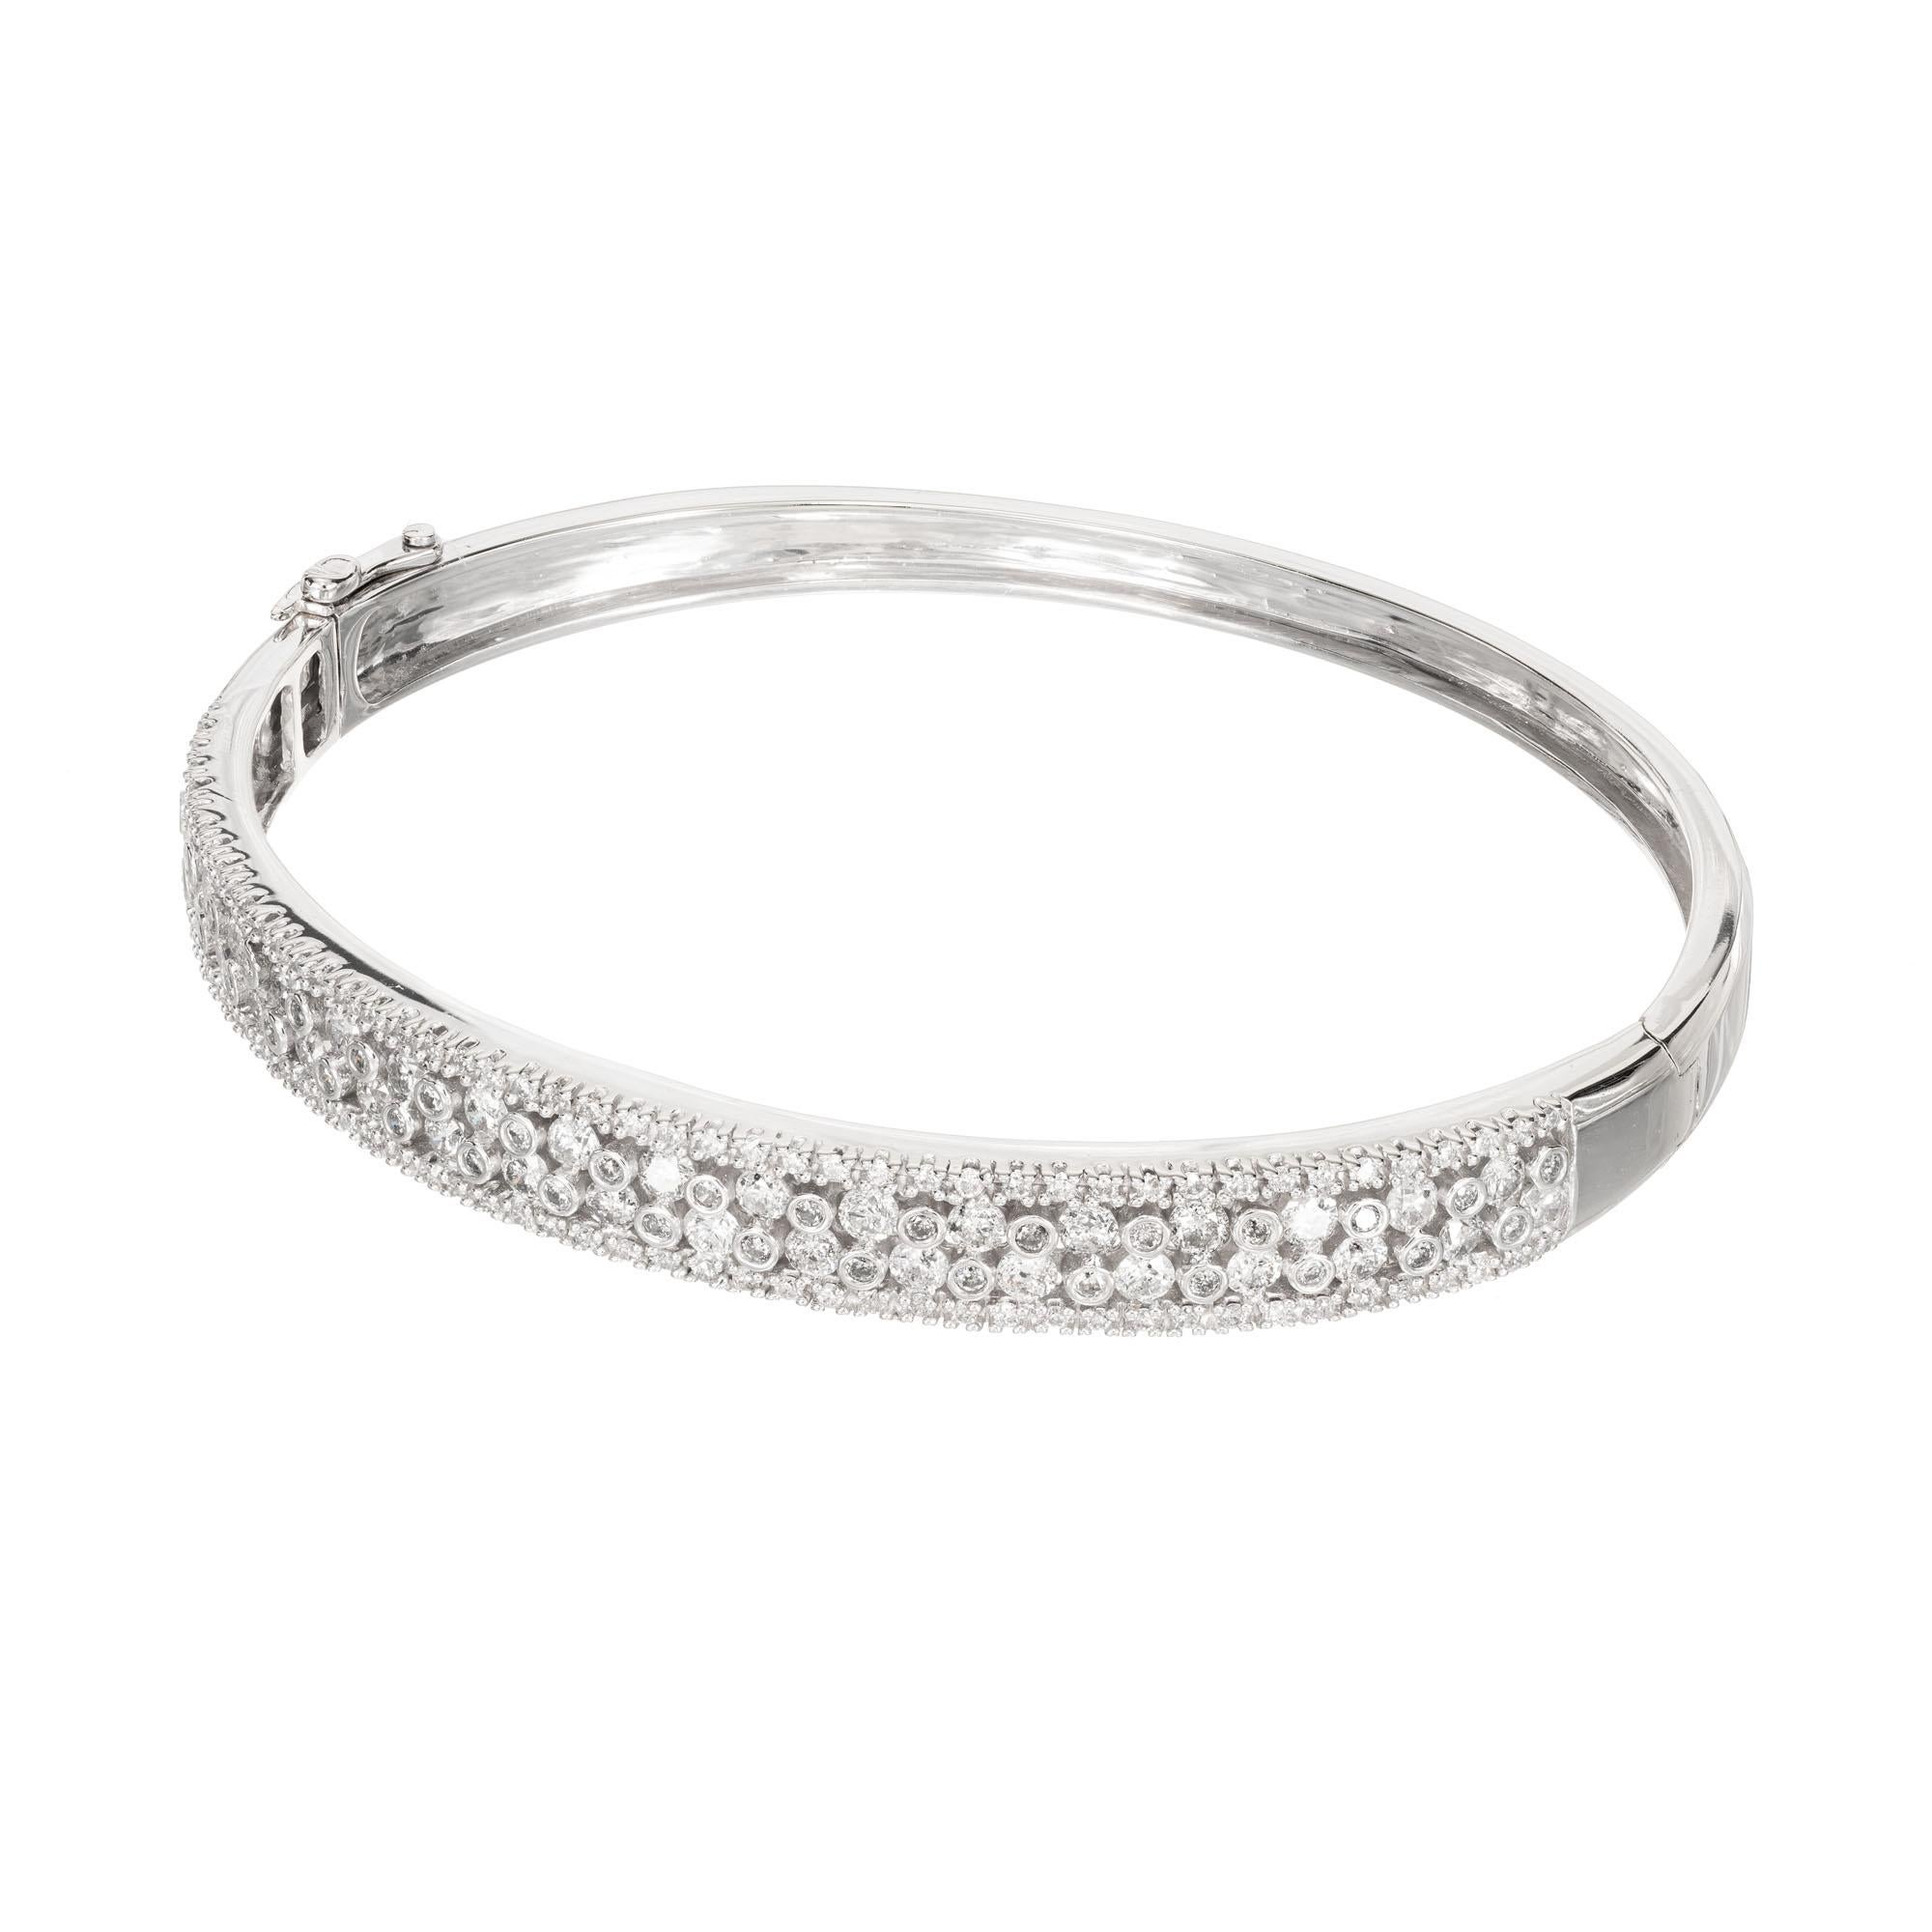 Open work diamond bracelet in 14k white gold with 4 rows of round Diamonds. Built in catch and side lock safety.

168 round Diamonds, approx. total weight 1.50cts, H, SI – I 
Fits a standard 7 to 7 1/2-inch wrist 
14k white gold 
19.2 grams 
Tested